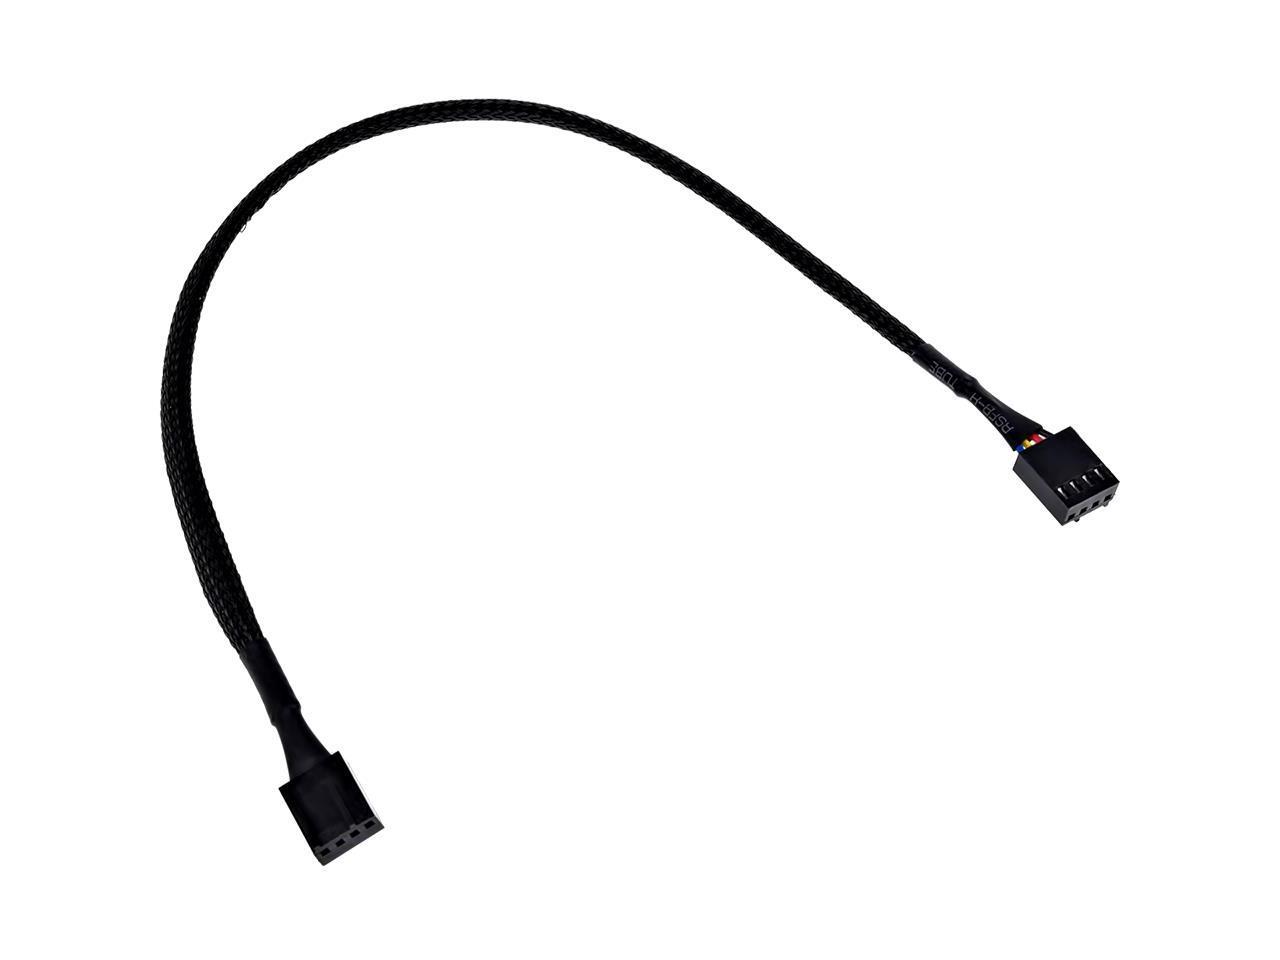 PWM 4 Pin 3 Wire Male to Male Cable 1 FT (30cm)